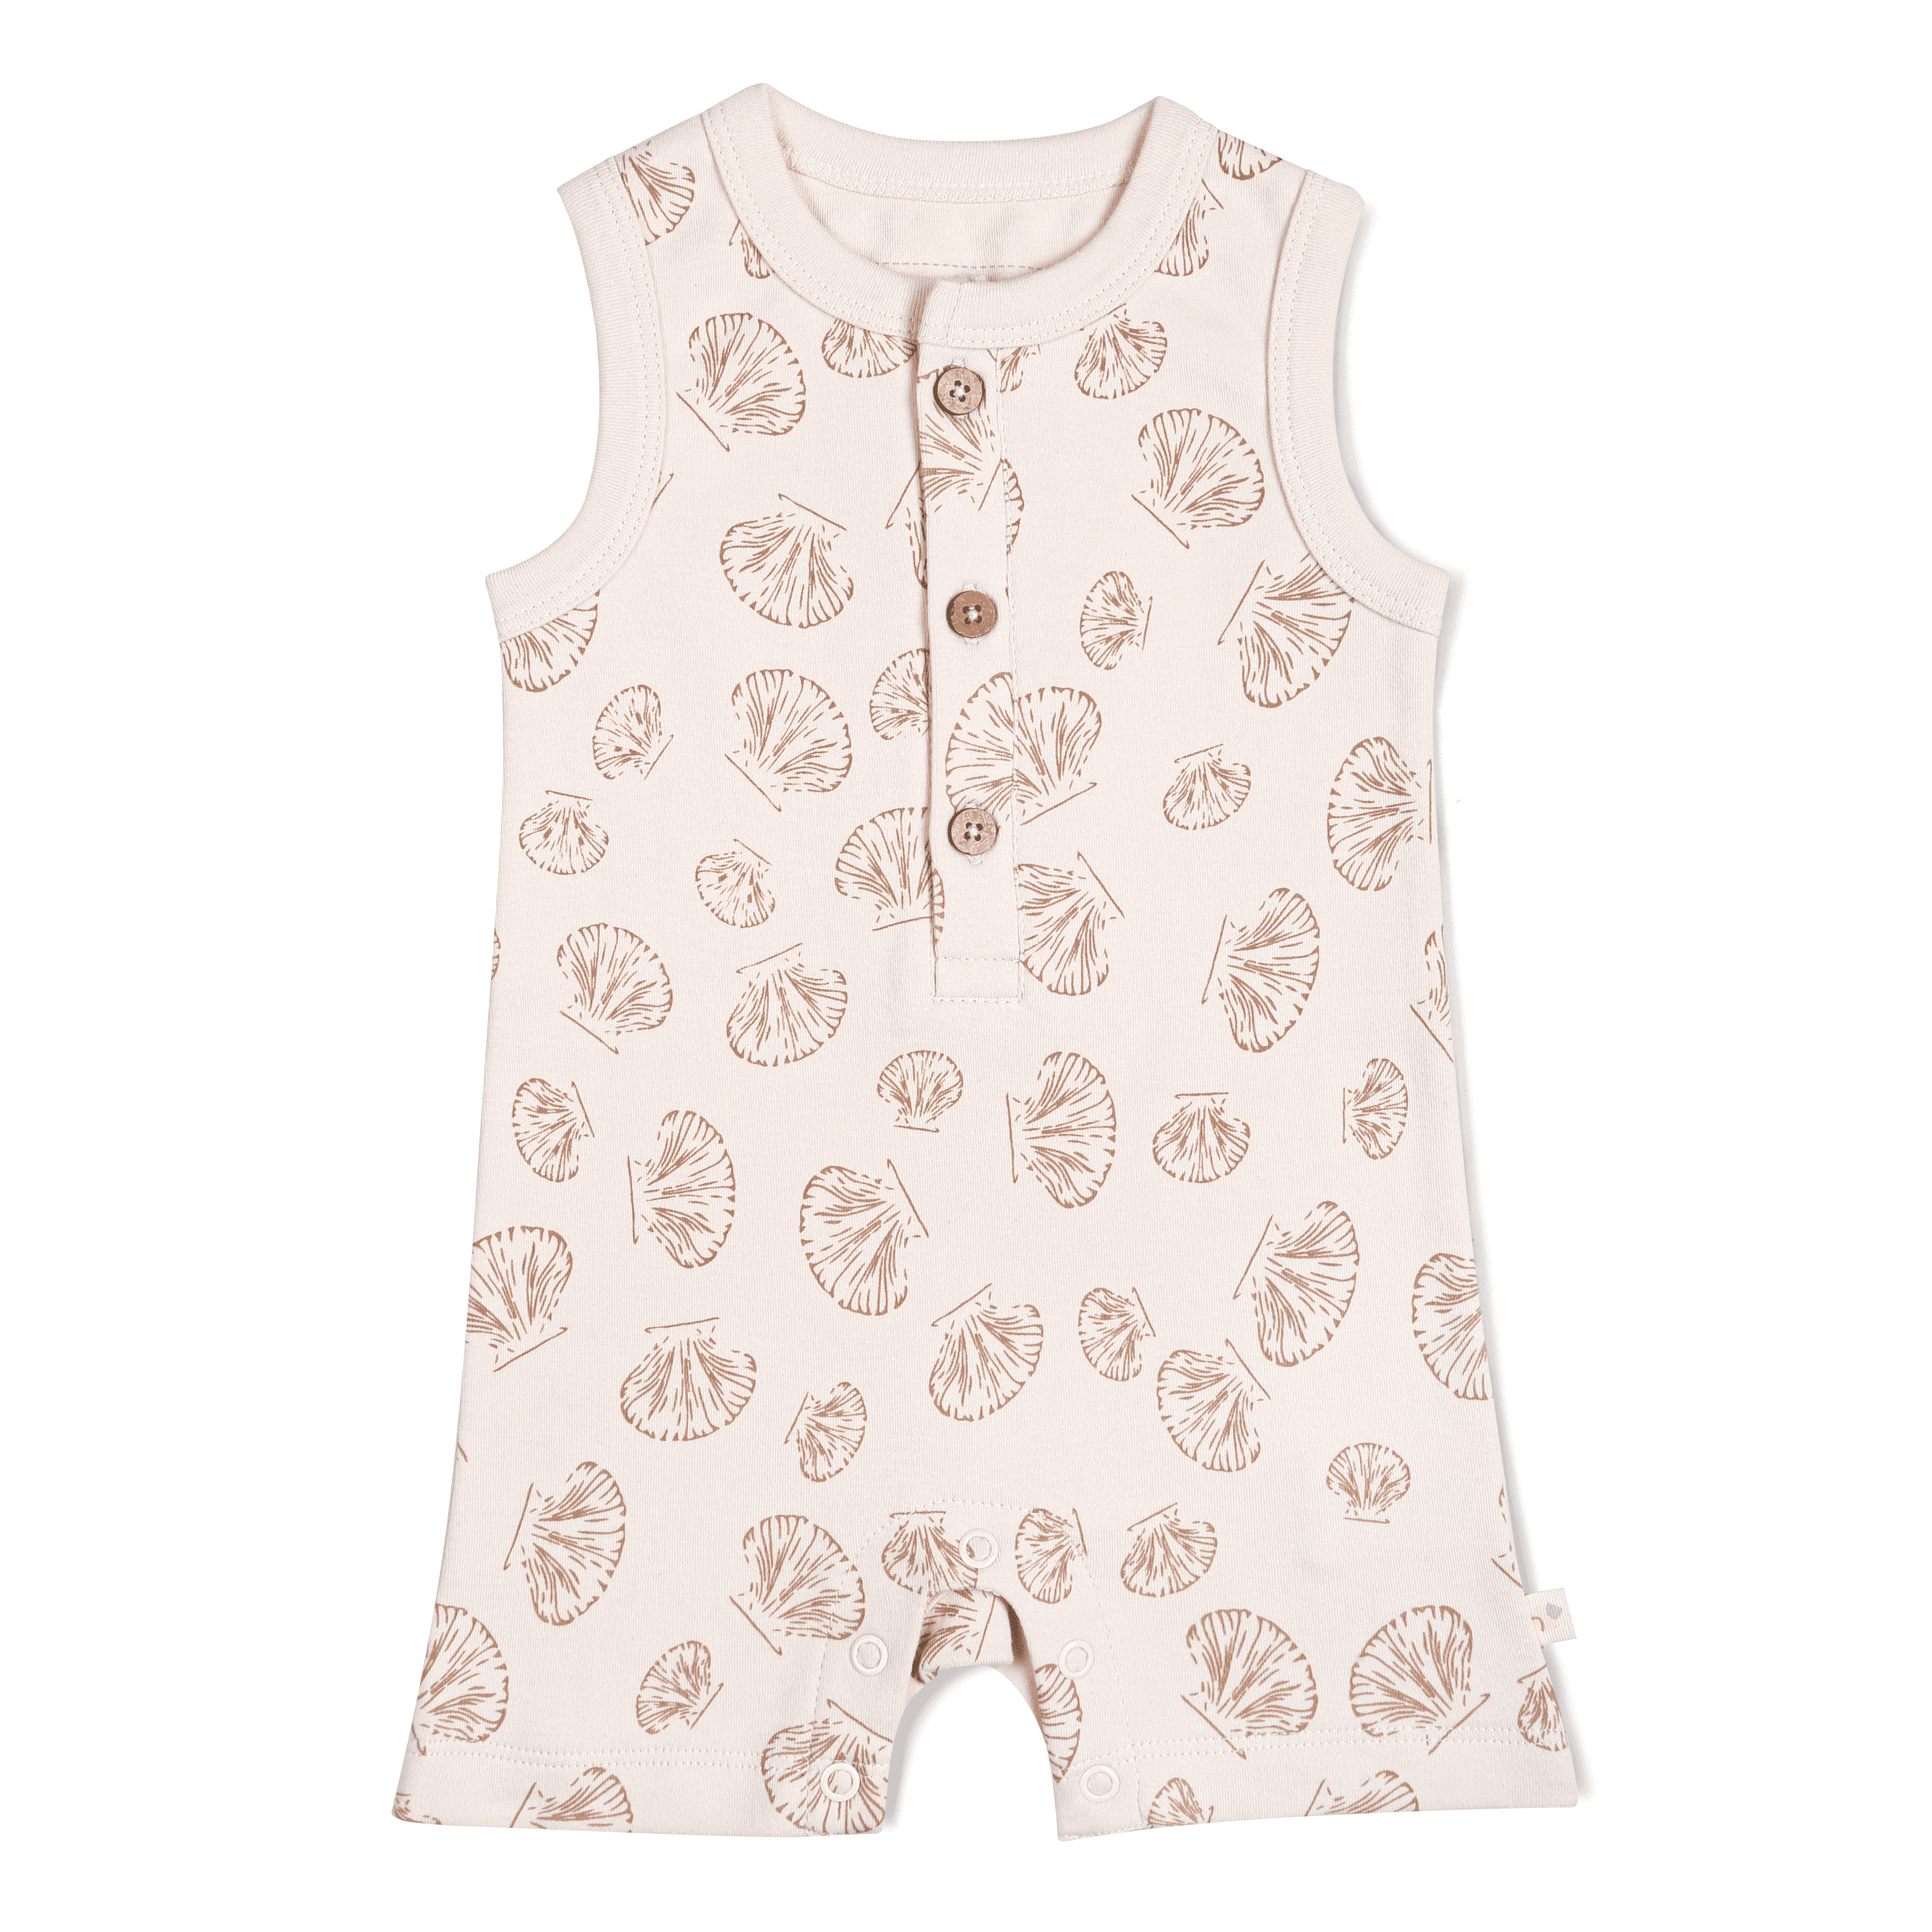 A pale pink Makemake Organics baby girl romper with a pattern of white seashells, featuring sleeveless design and snap buttons at the shoulder and inseam for easy dressing.